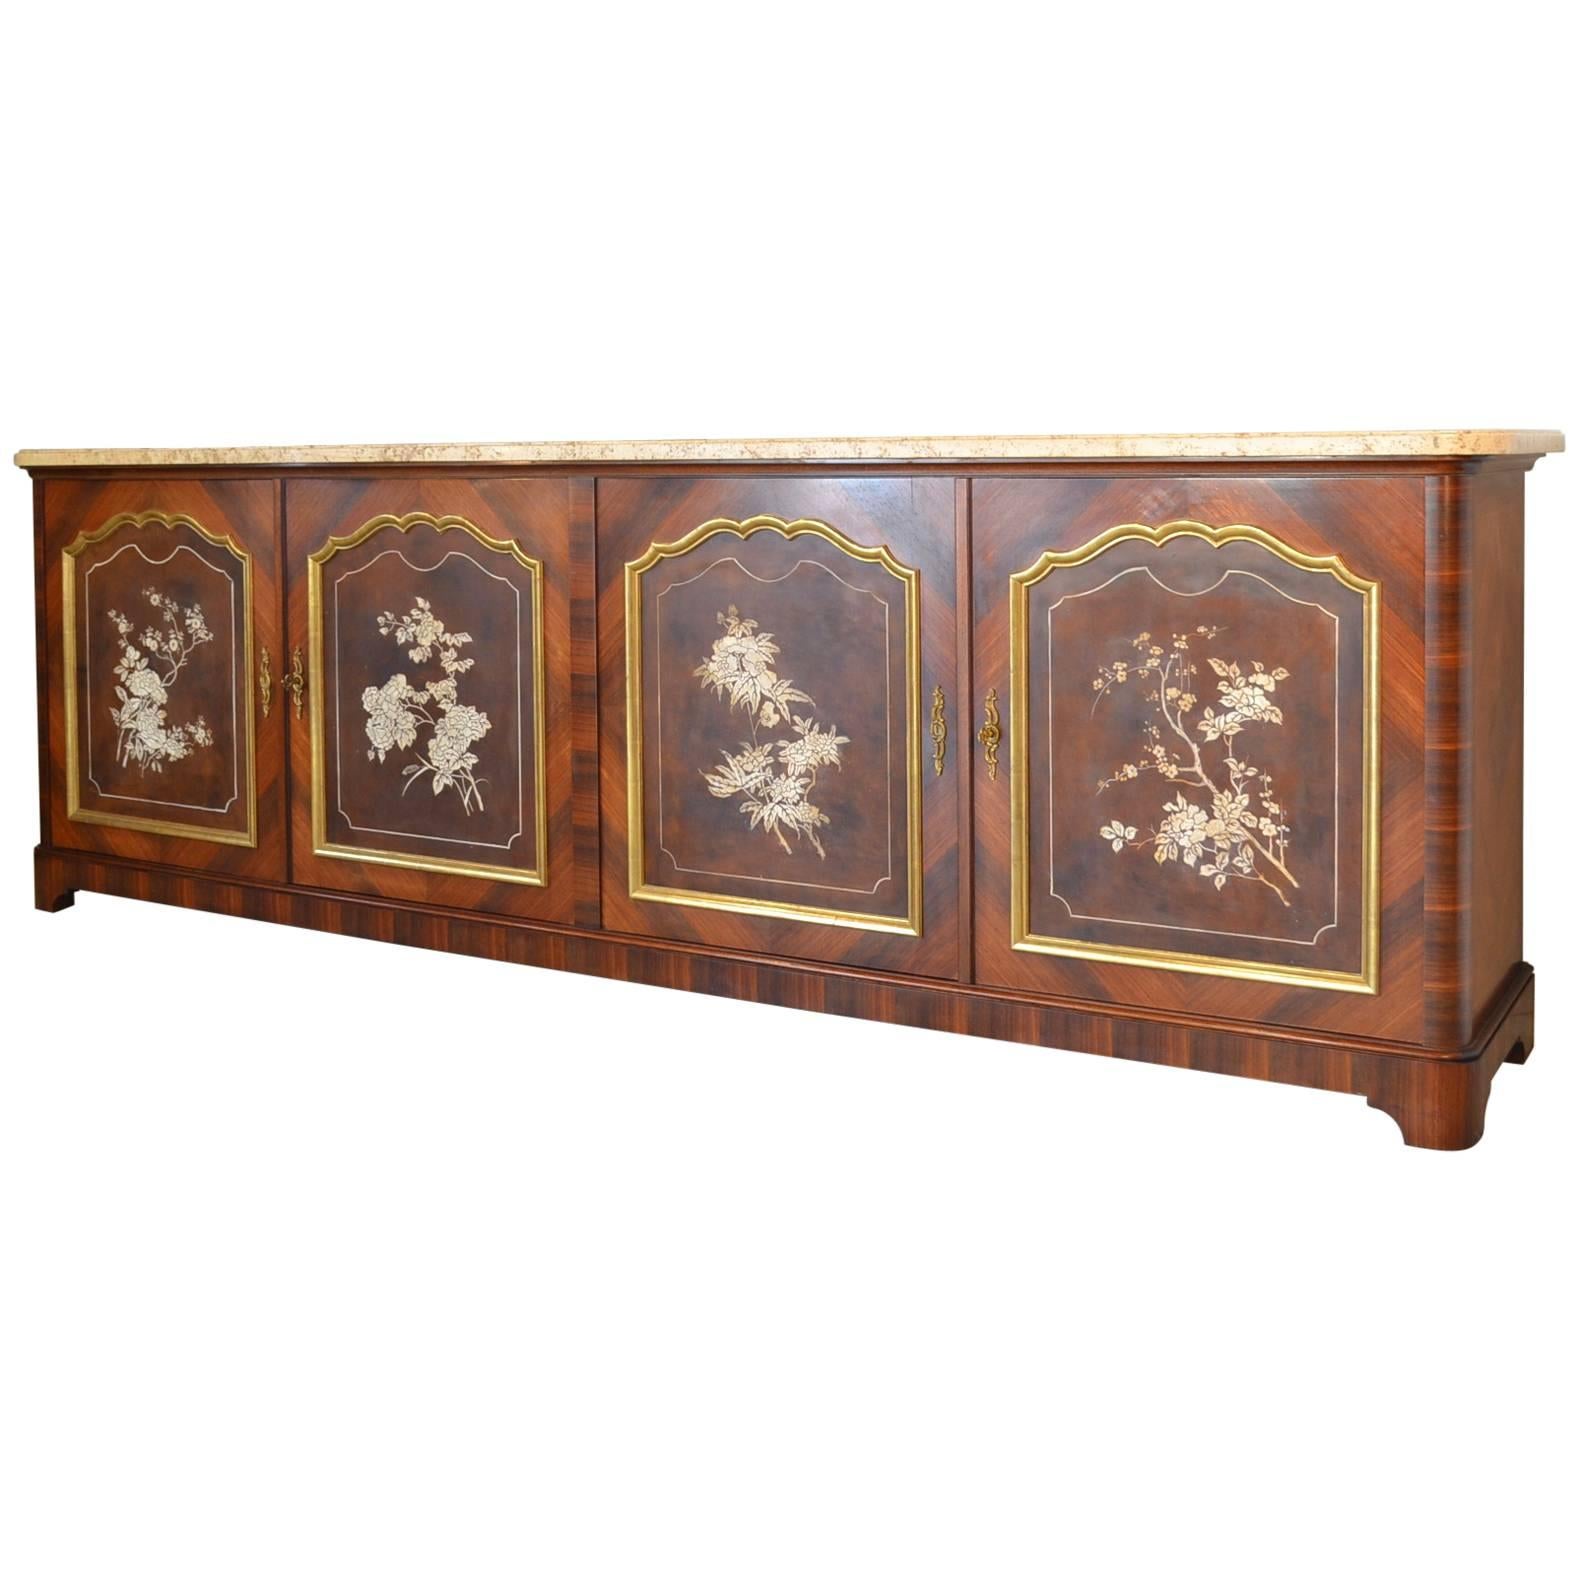 A large French Maison Jansen four door sideboard with travertine top. Marquetry veneer of mahogany with decorative painted panels on the doors. Two keys with working locks. A handsome piece with great proportions. Please note the large-scale at